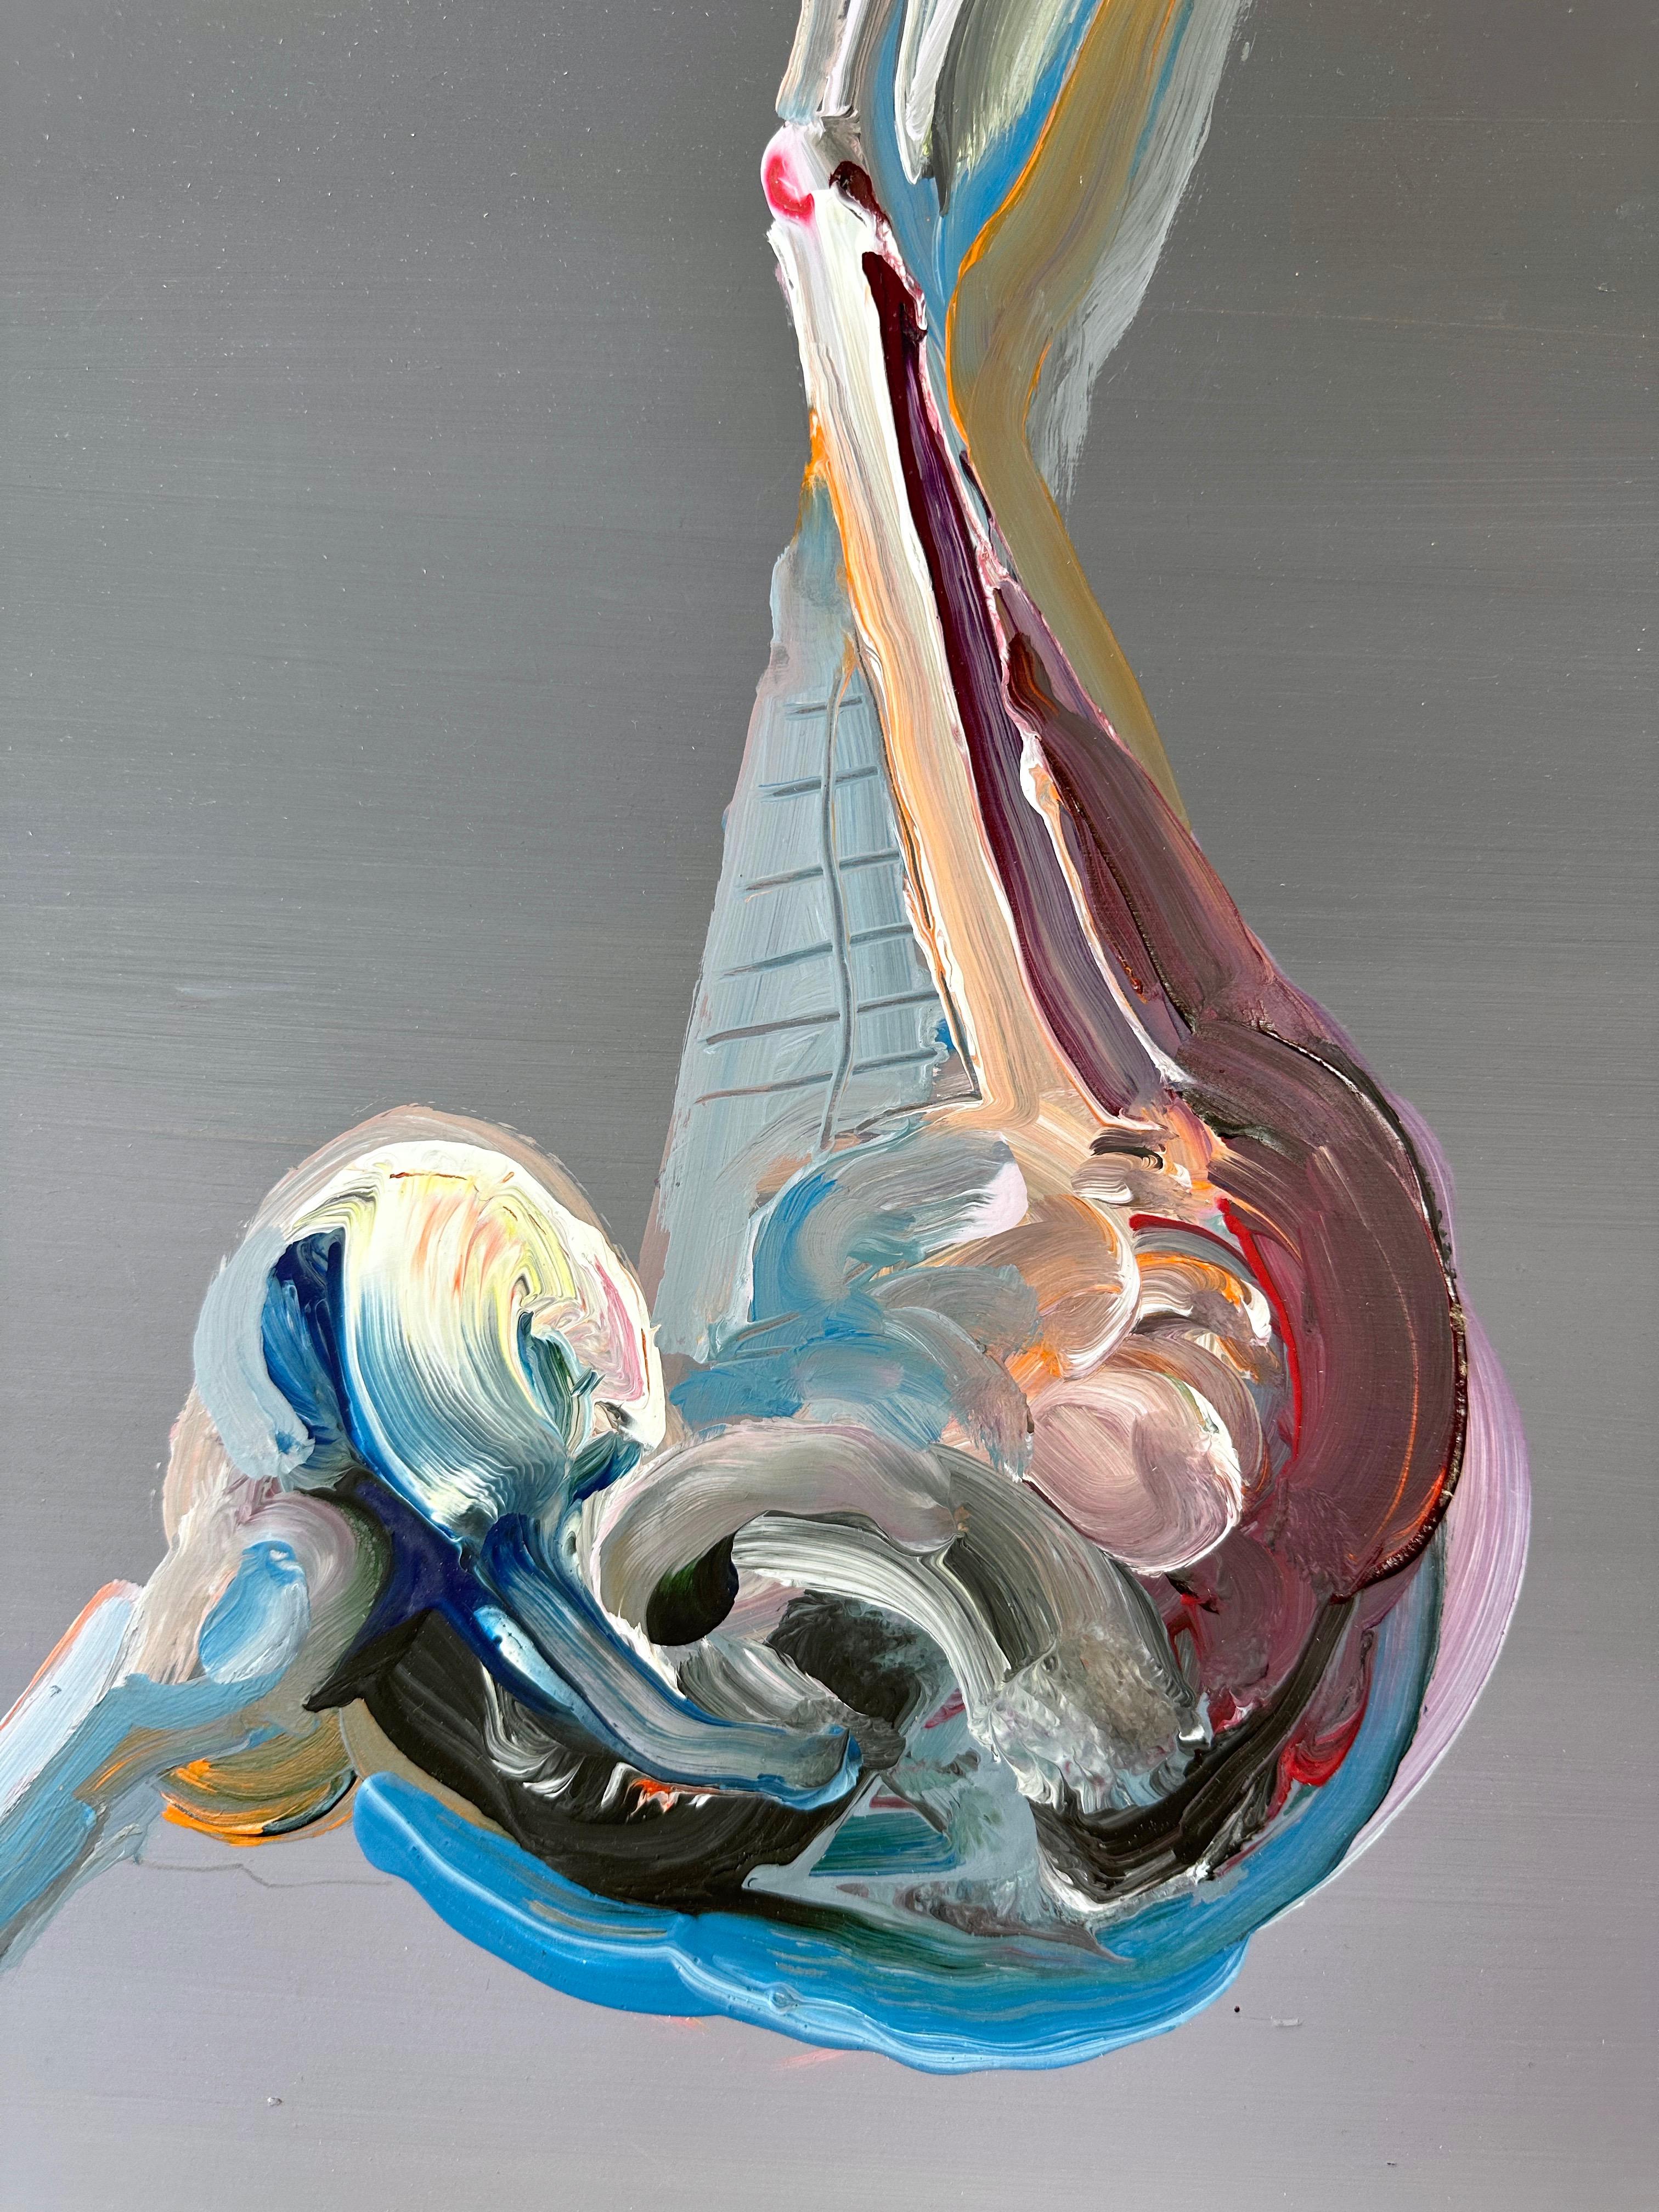 Wood Jan Stussy “Parachute Jump Series No. 14”, Expressionist Acrylic Painting, 1980s For Sale